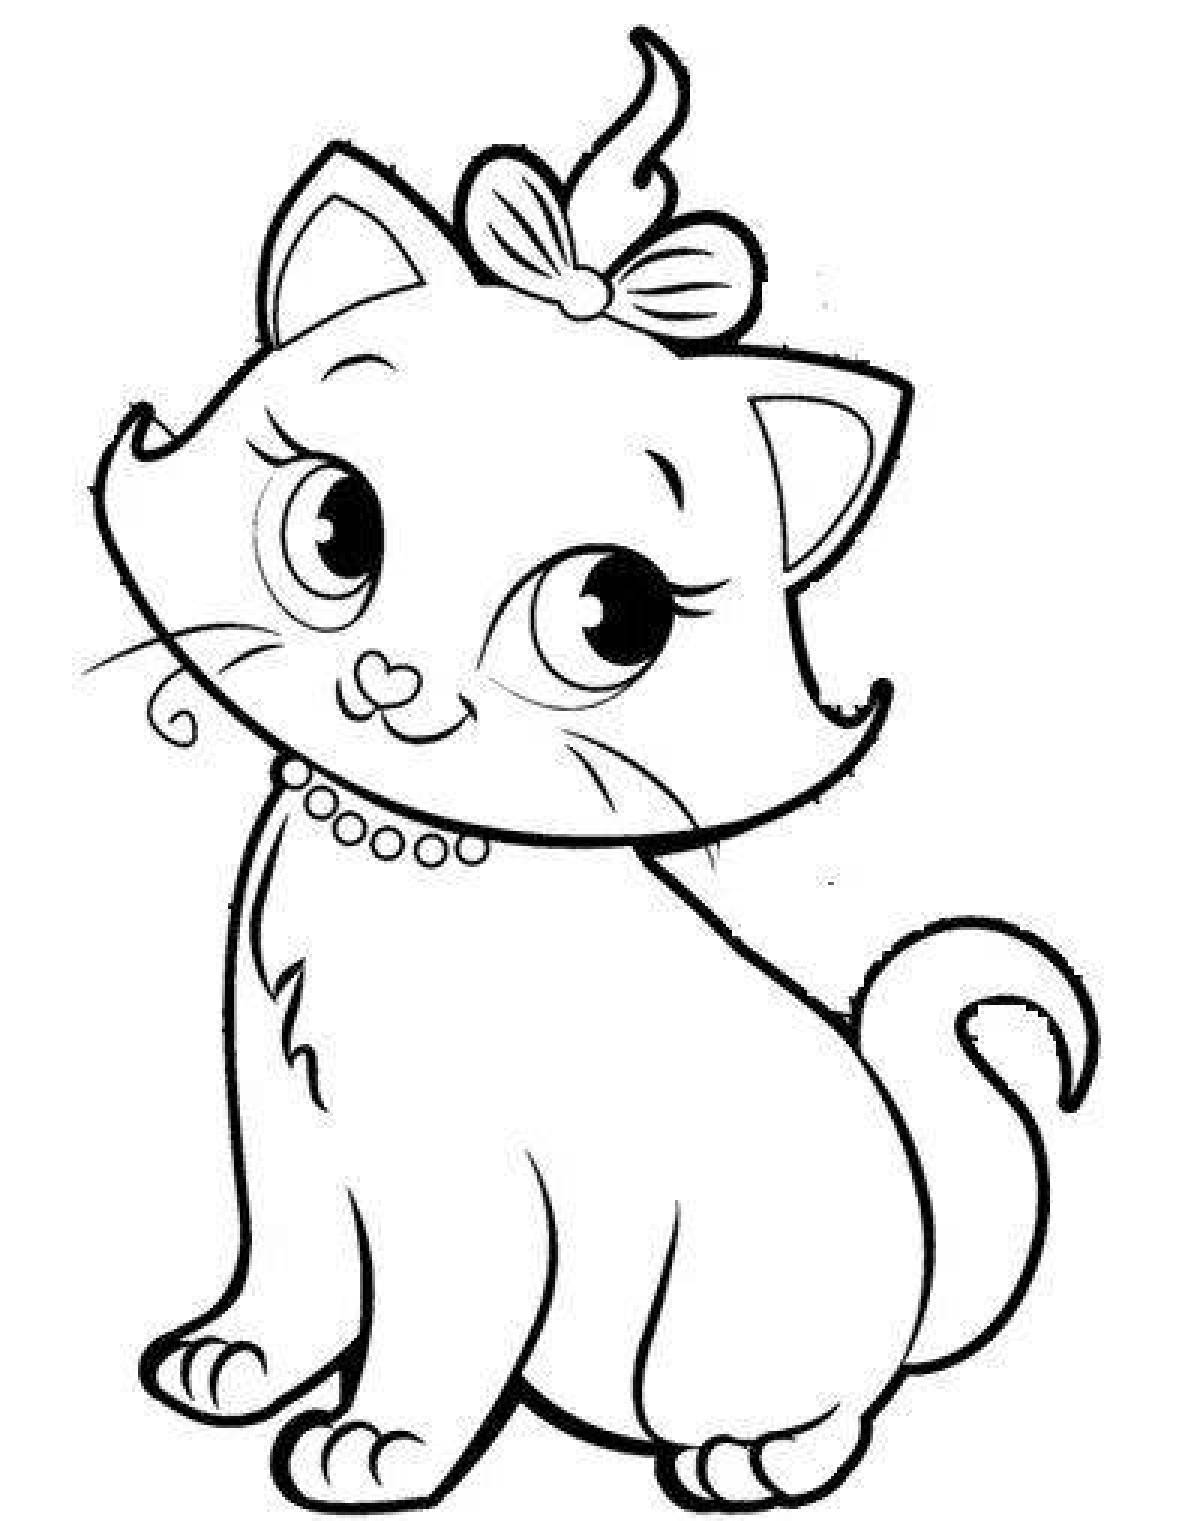 Glittering rainbow cat coloring page